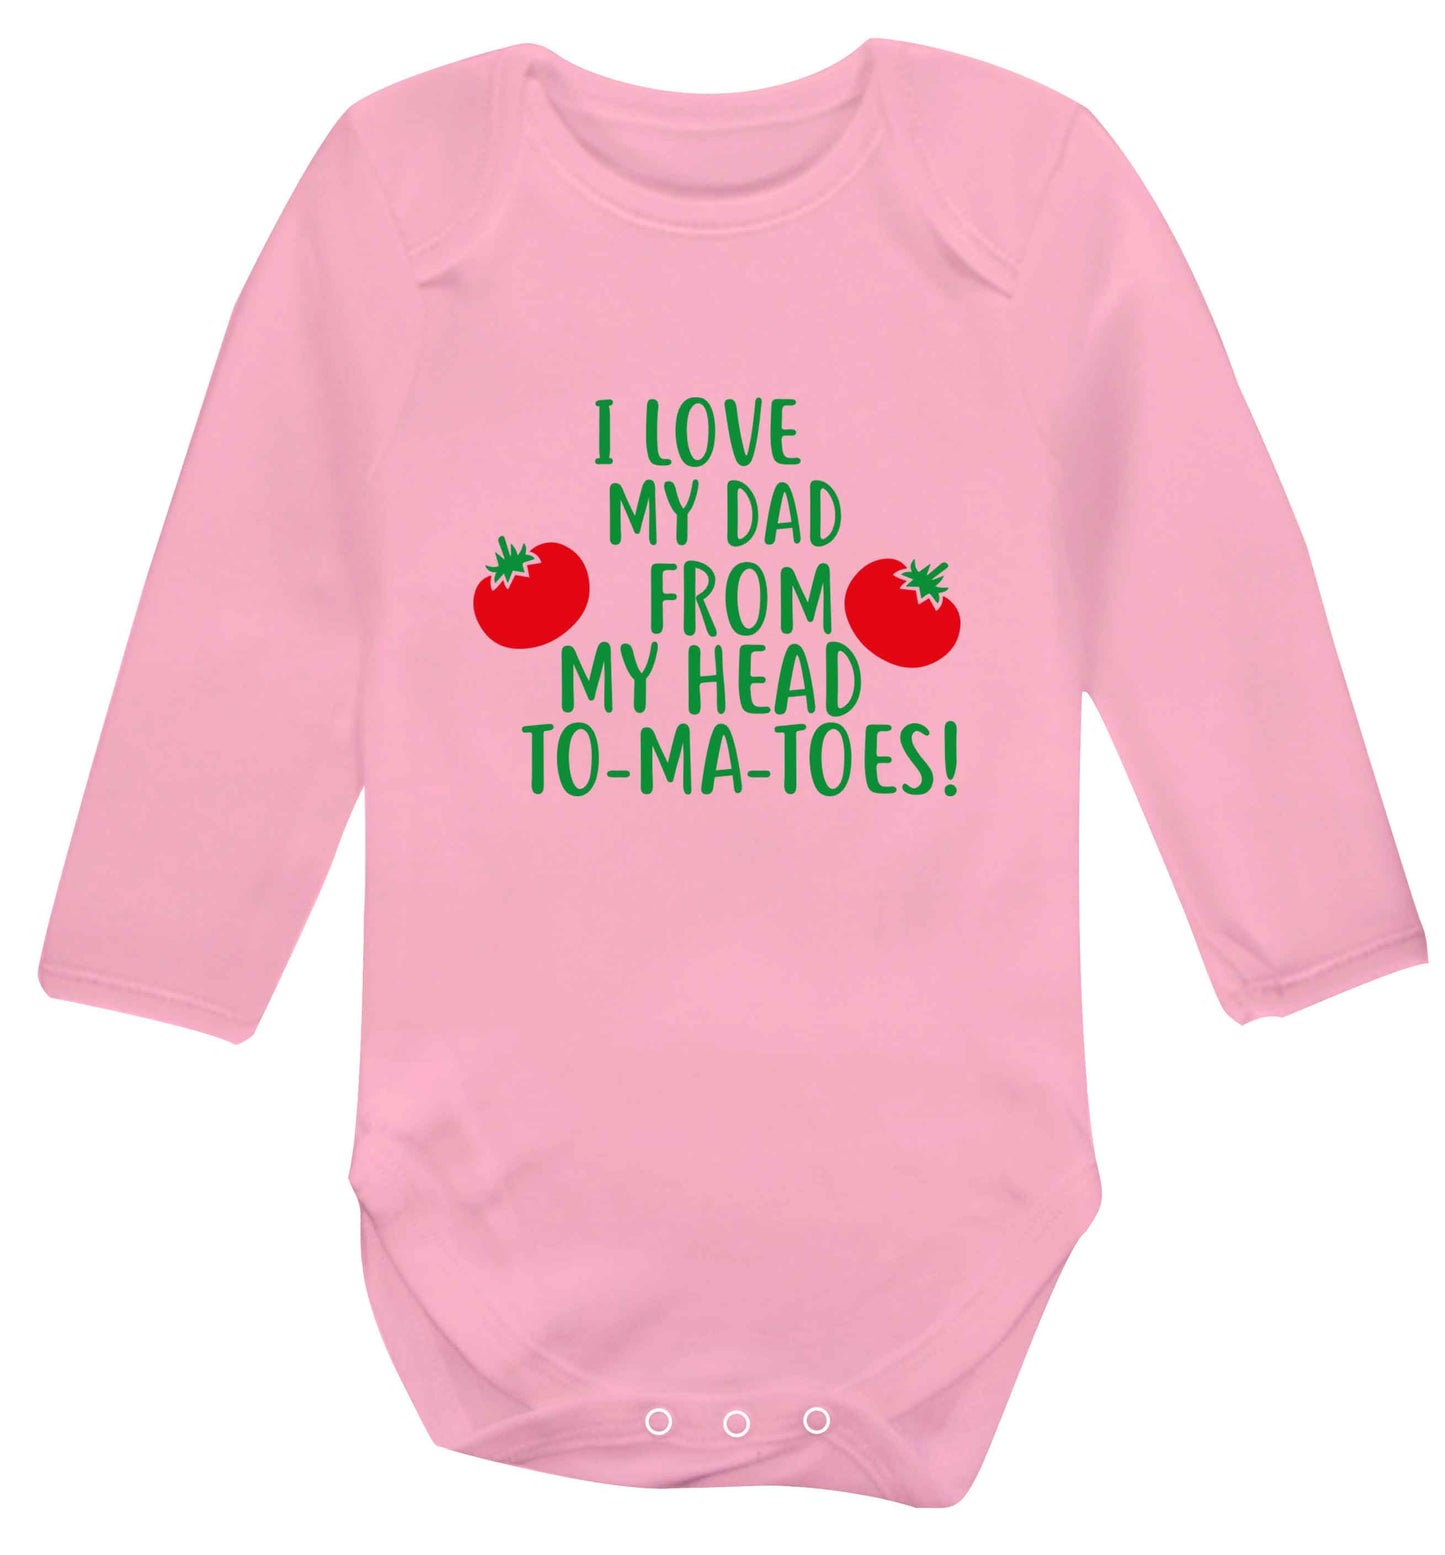 I love my dad from my head to-ma-toes baby vest long sleeved pale pink 6-12 months